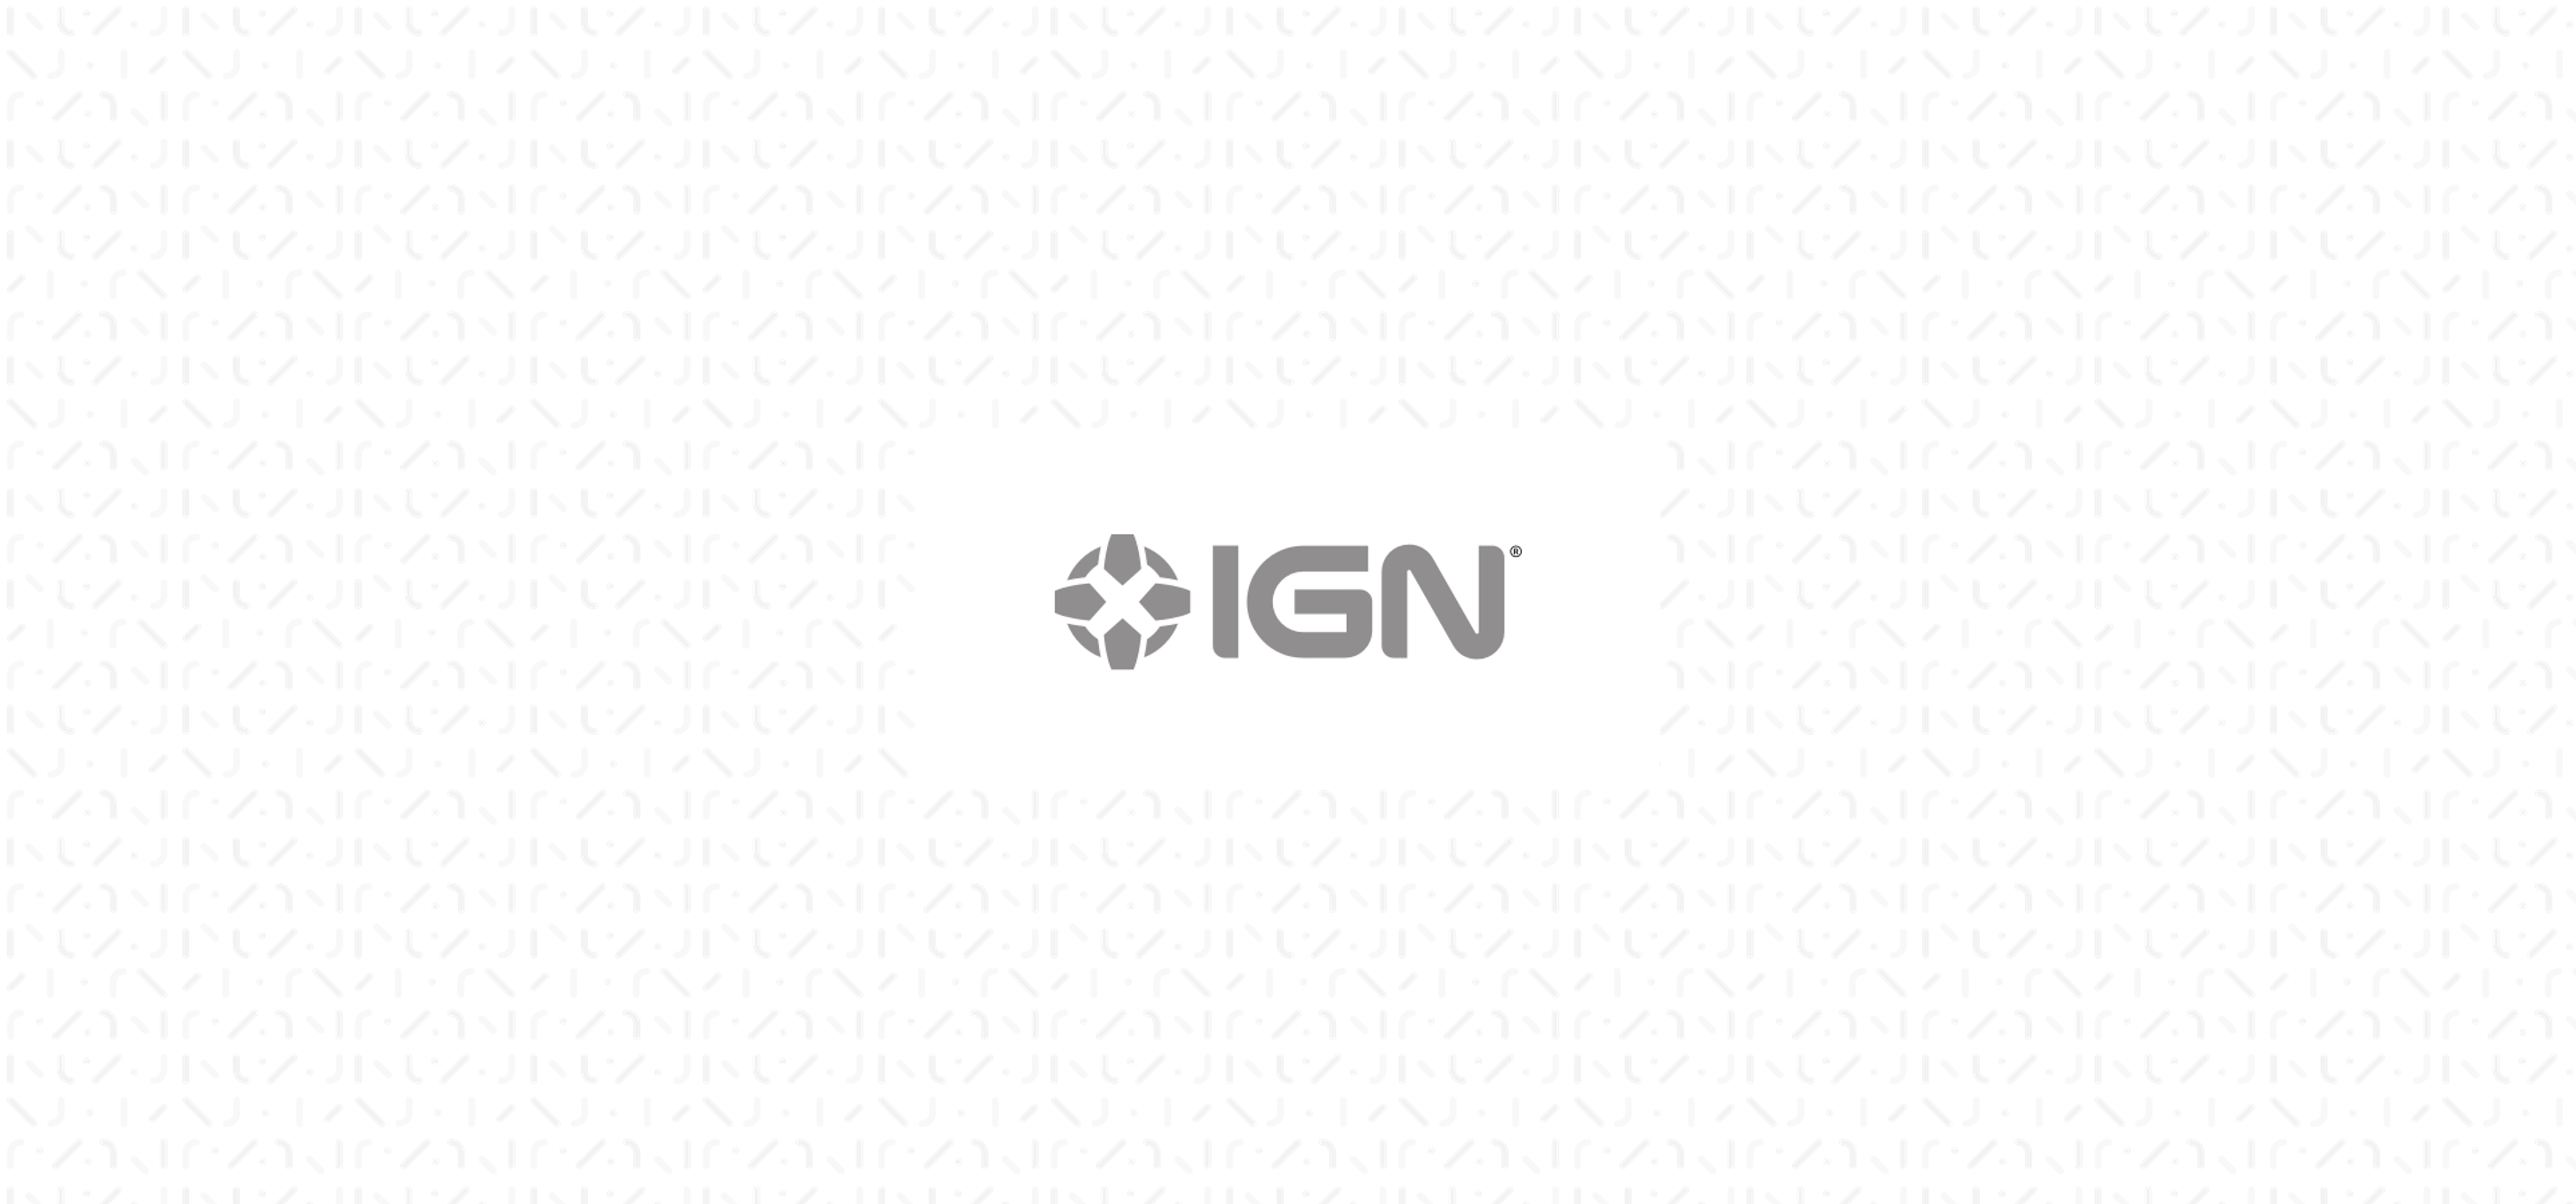 Customer Conversations: IGN implements a new player with Mux